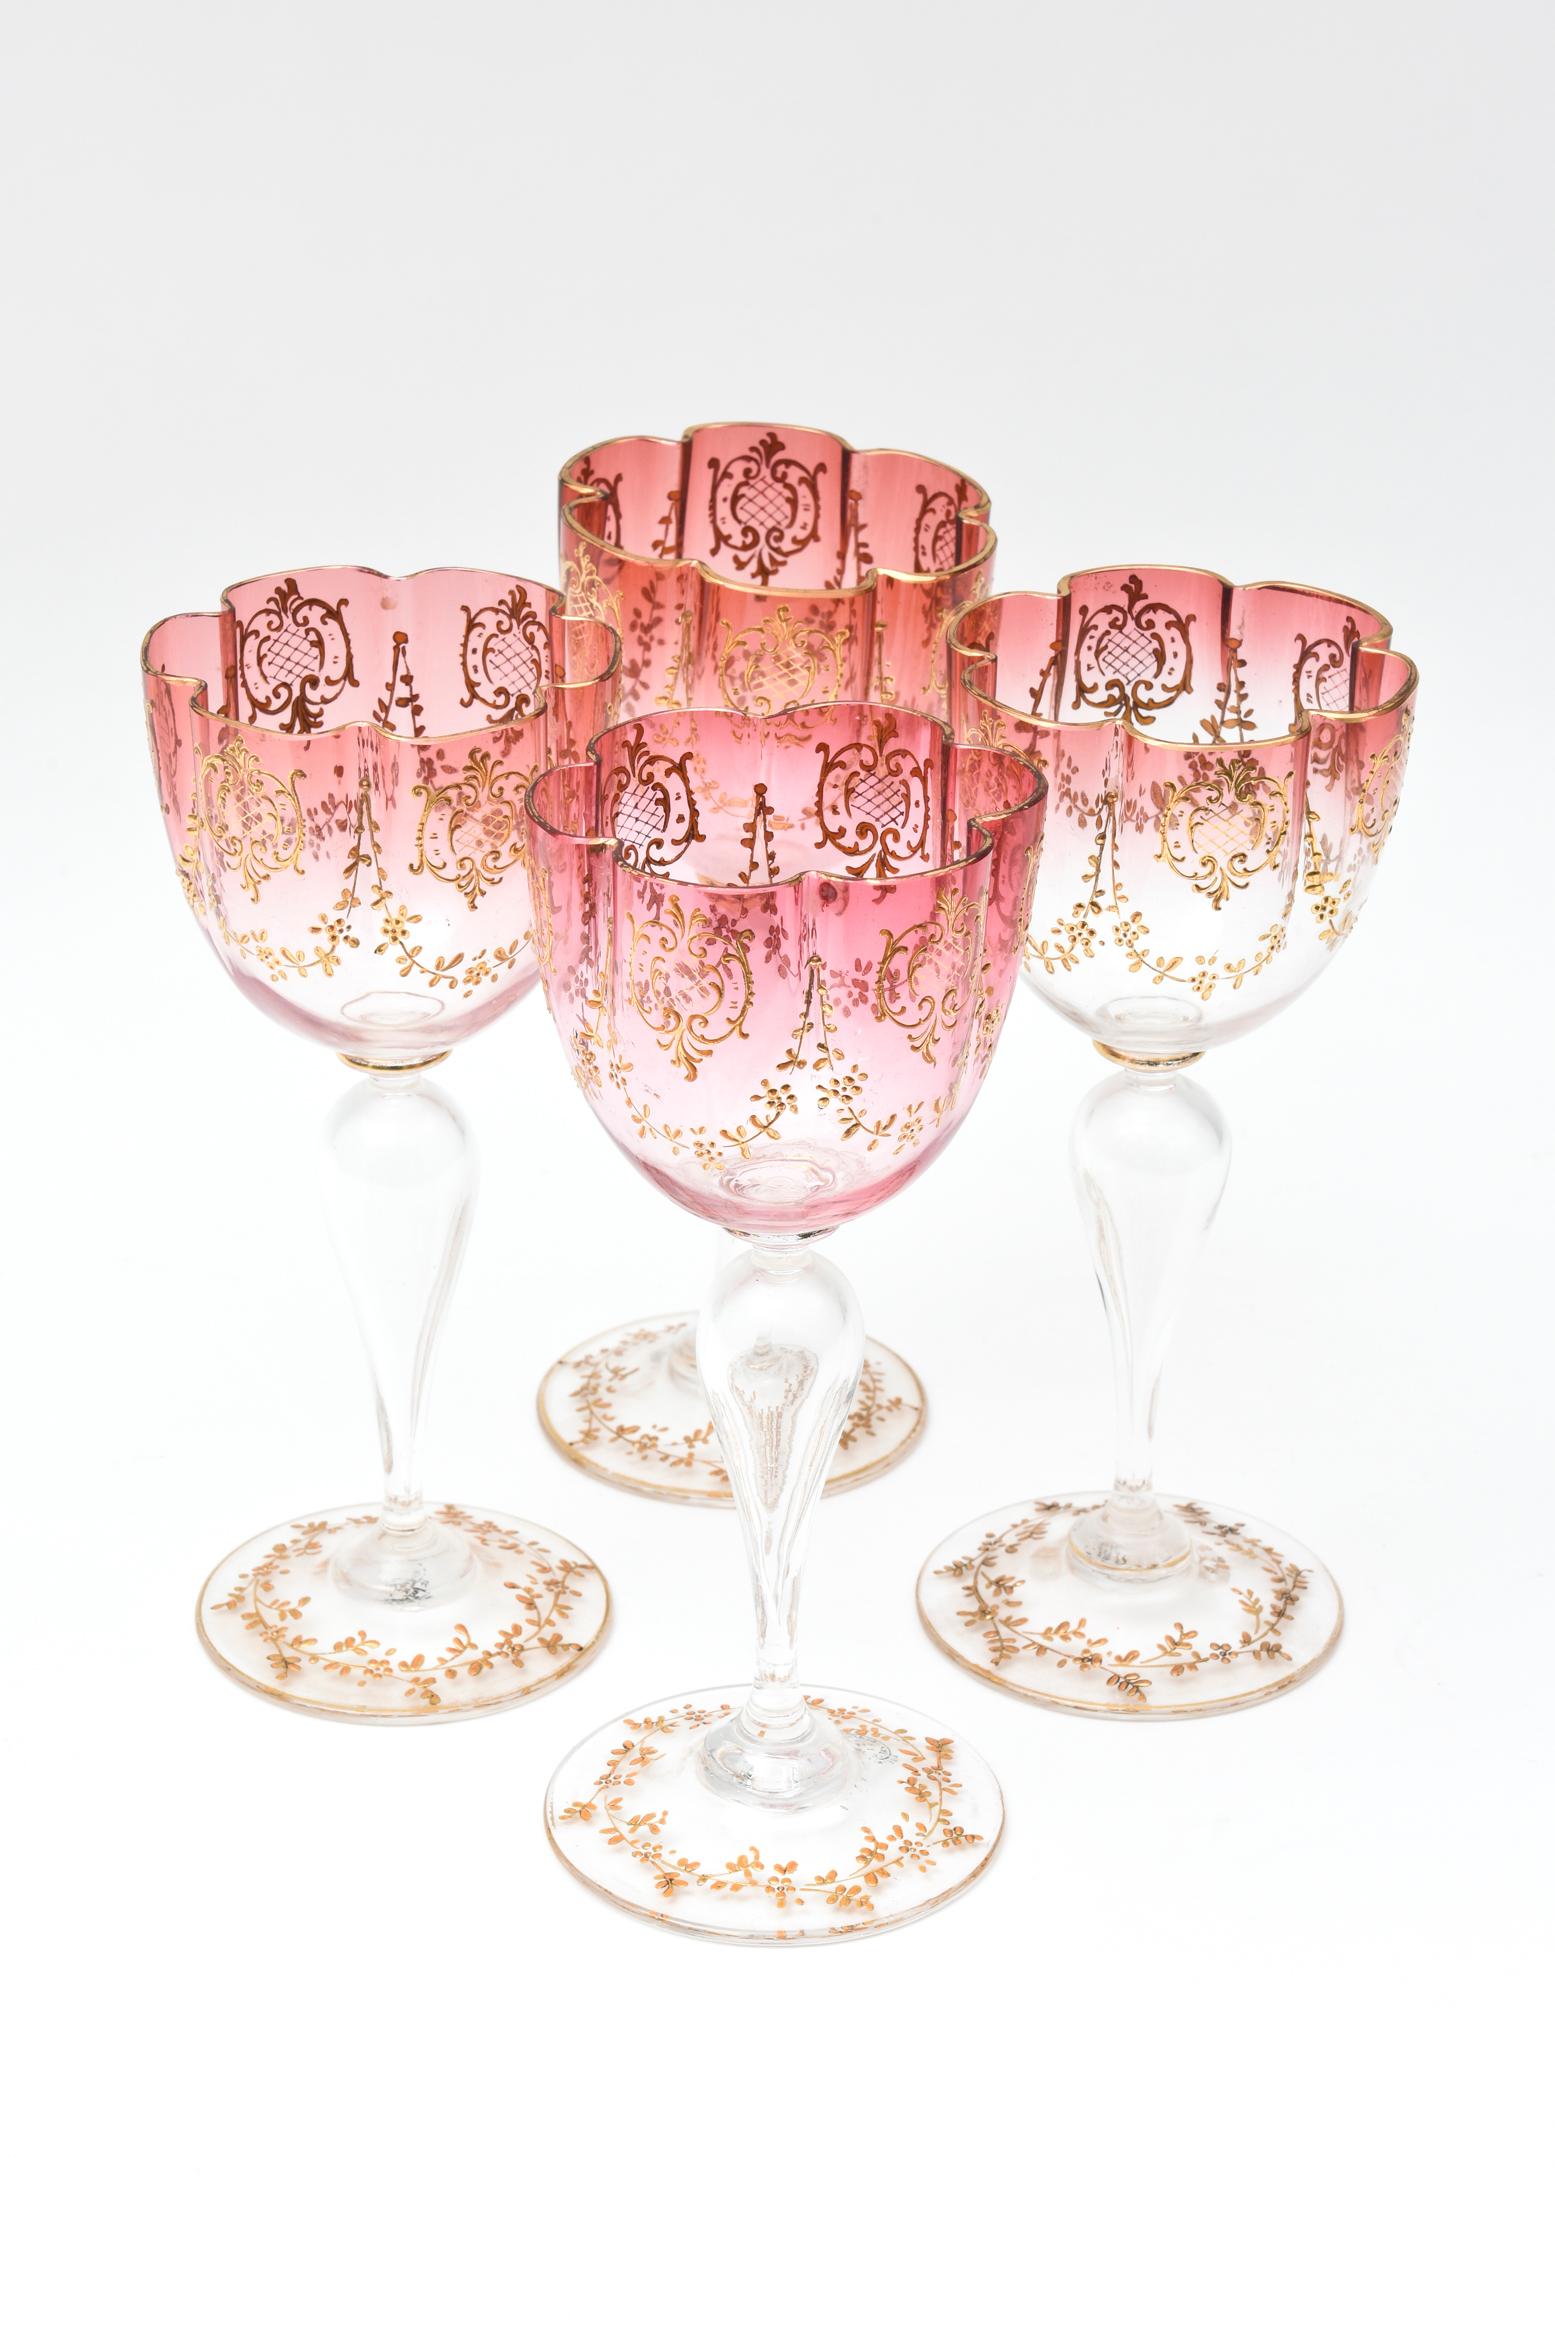 Early 20th Century Set of 4 Elaborate Antique Moser Ruby Gilt Wine Goblets